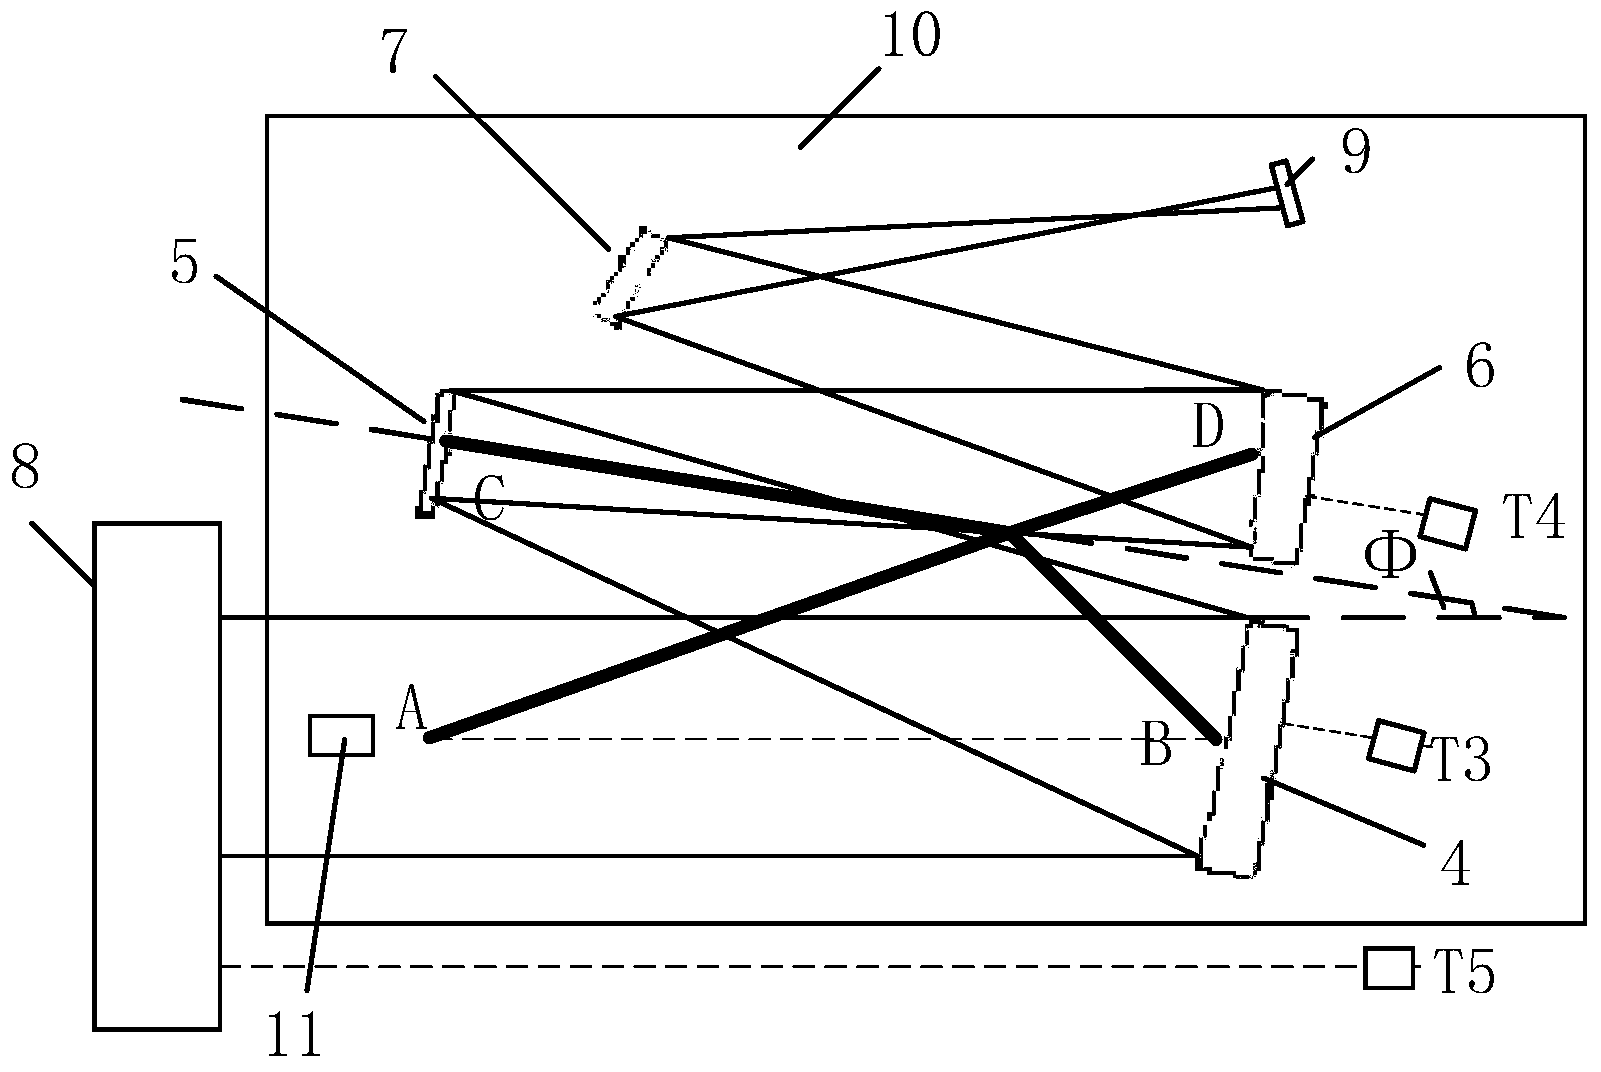 Initial assembly positioning method for four off-axis lenses